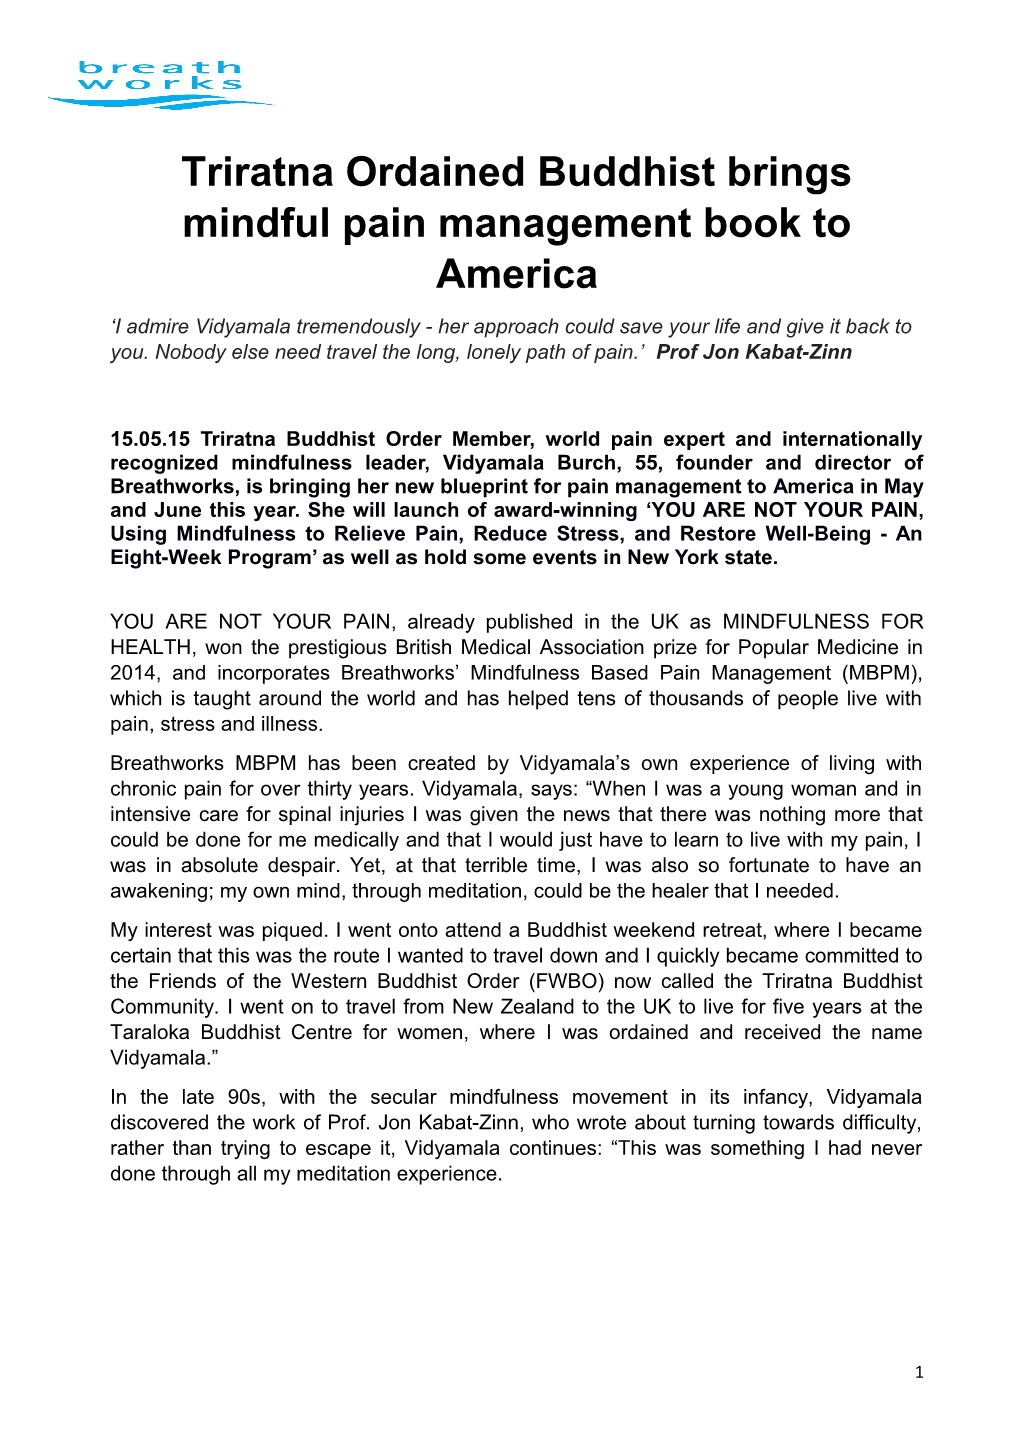 Triratna Ordained Buddhist Brings Mindful Pain Management Book to America